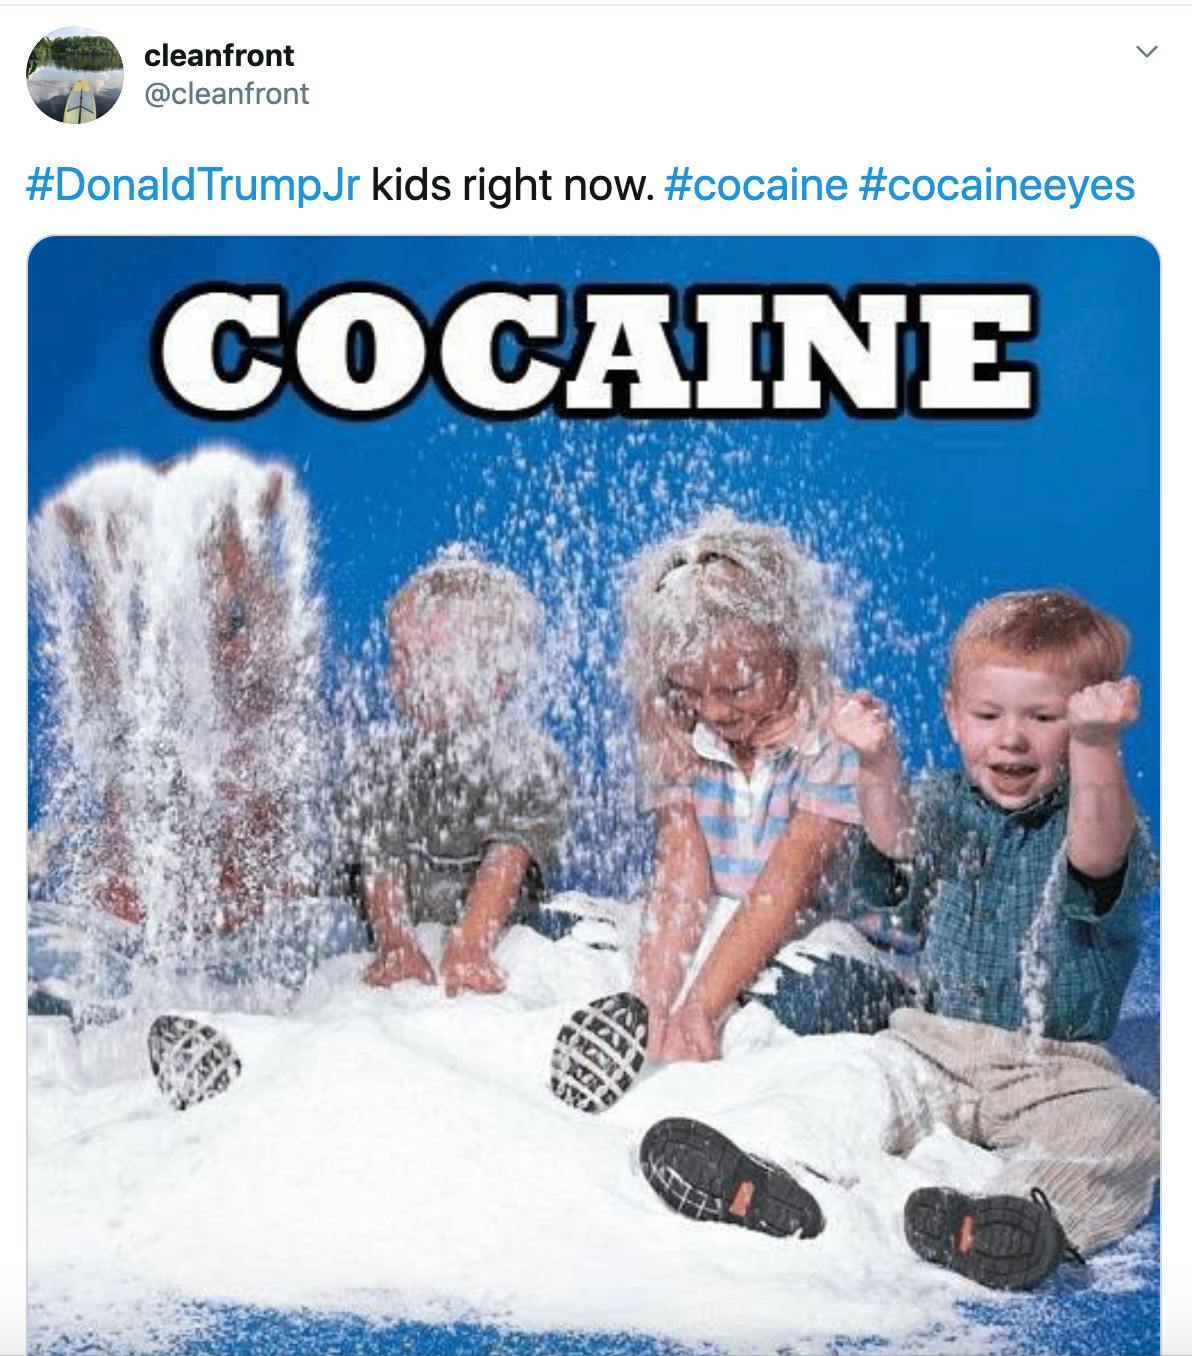 "#DonaldTrumpJr kids right now. #cocaine #cocaineeyes" image of toddlers playing in a heap of white powder